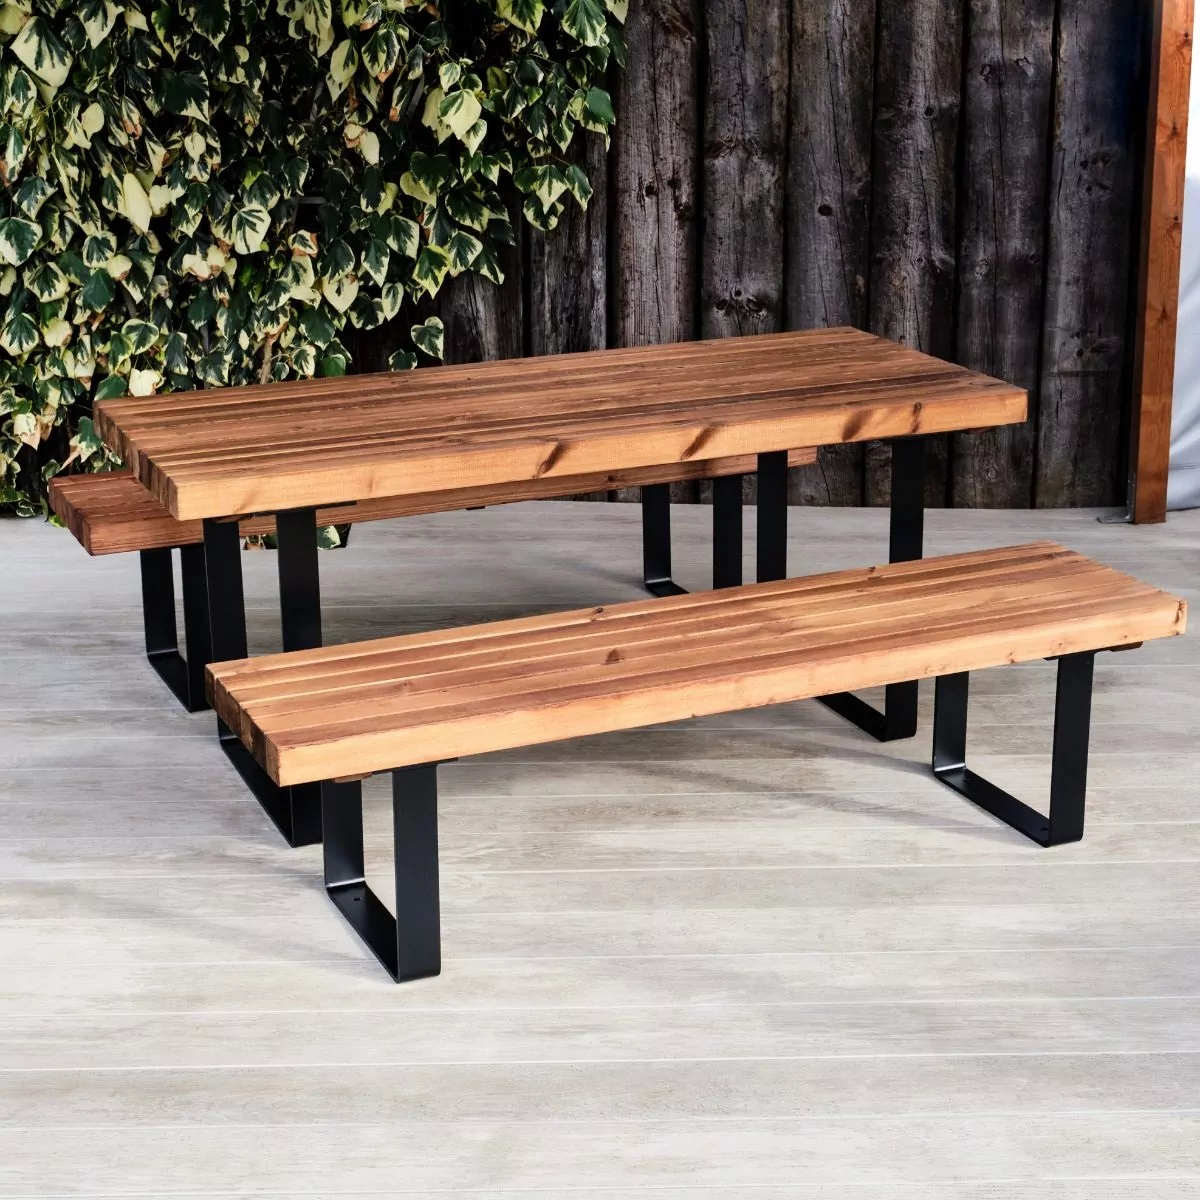 wood-and-metal-industrial-outdoor-commercial-bench-2.jpg